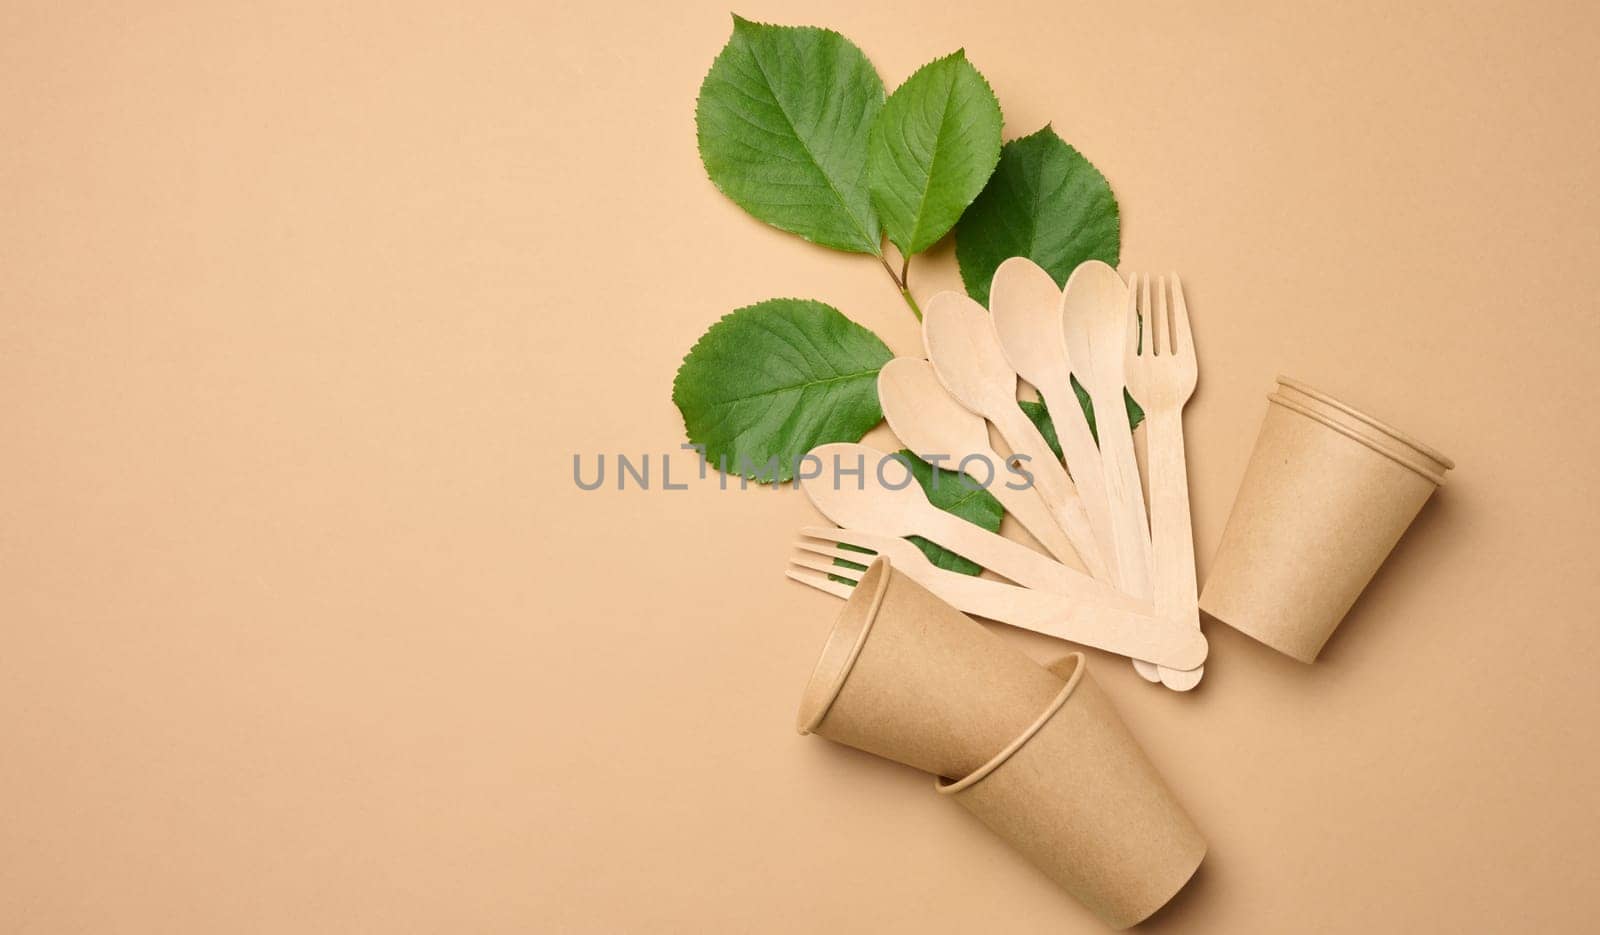 Paper cups, wooden spoons and forks on a beige background by ndanko